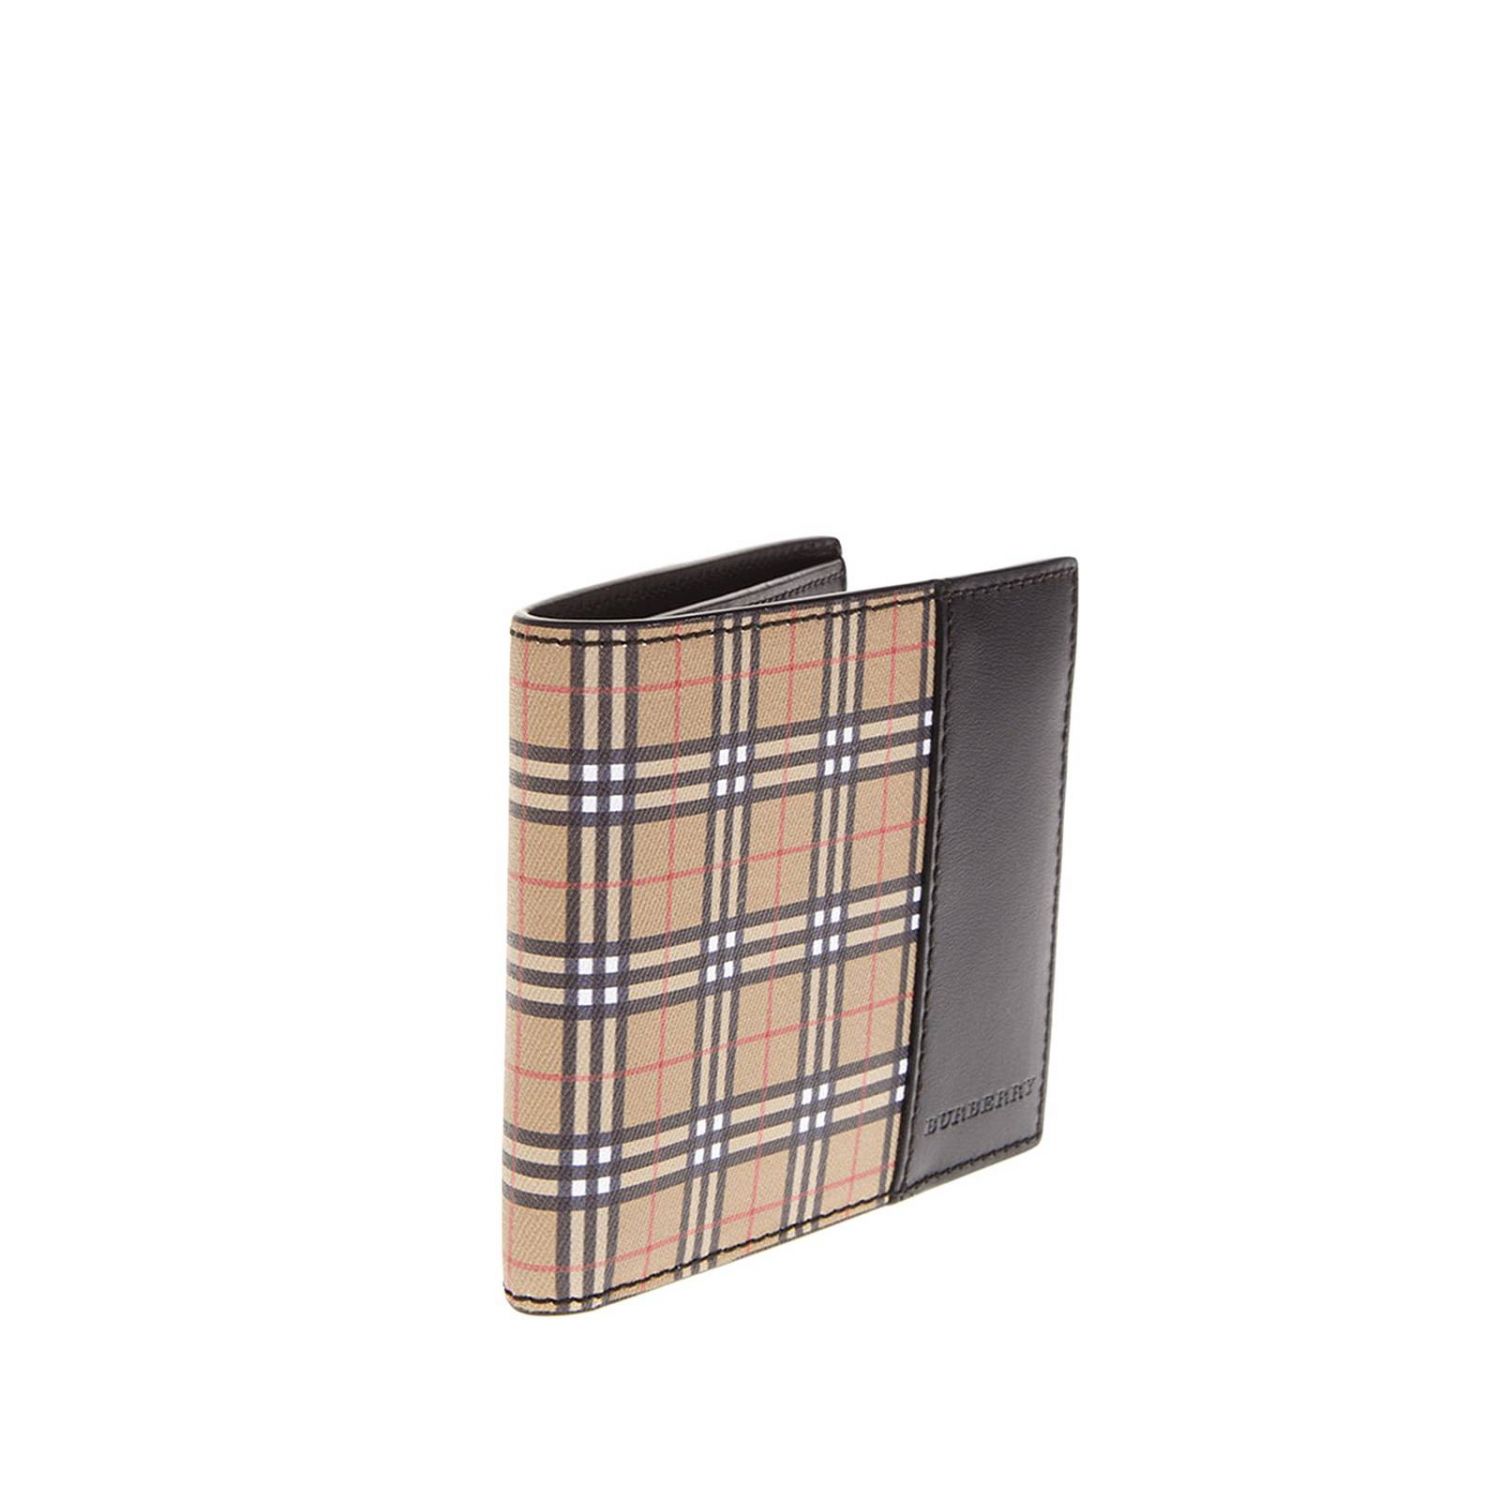 Burberry Outlet: Wallet women - Black | Wallet Burberry 4078054 GIGLIO.COM